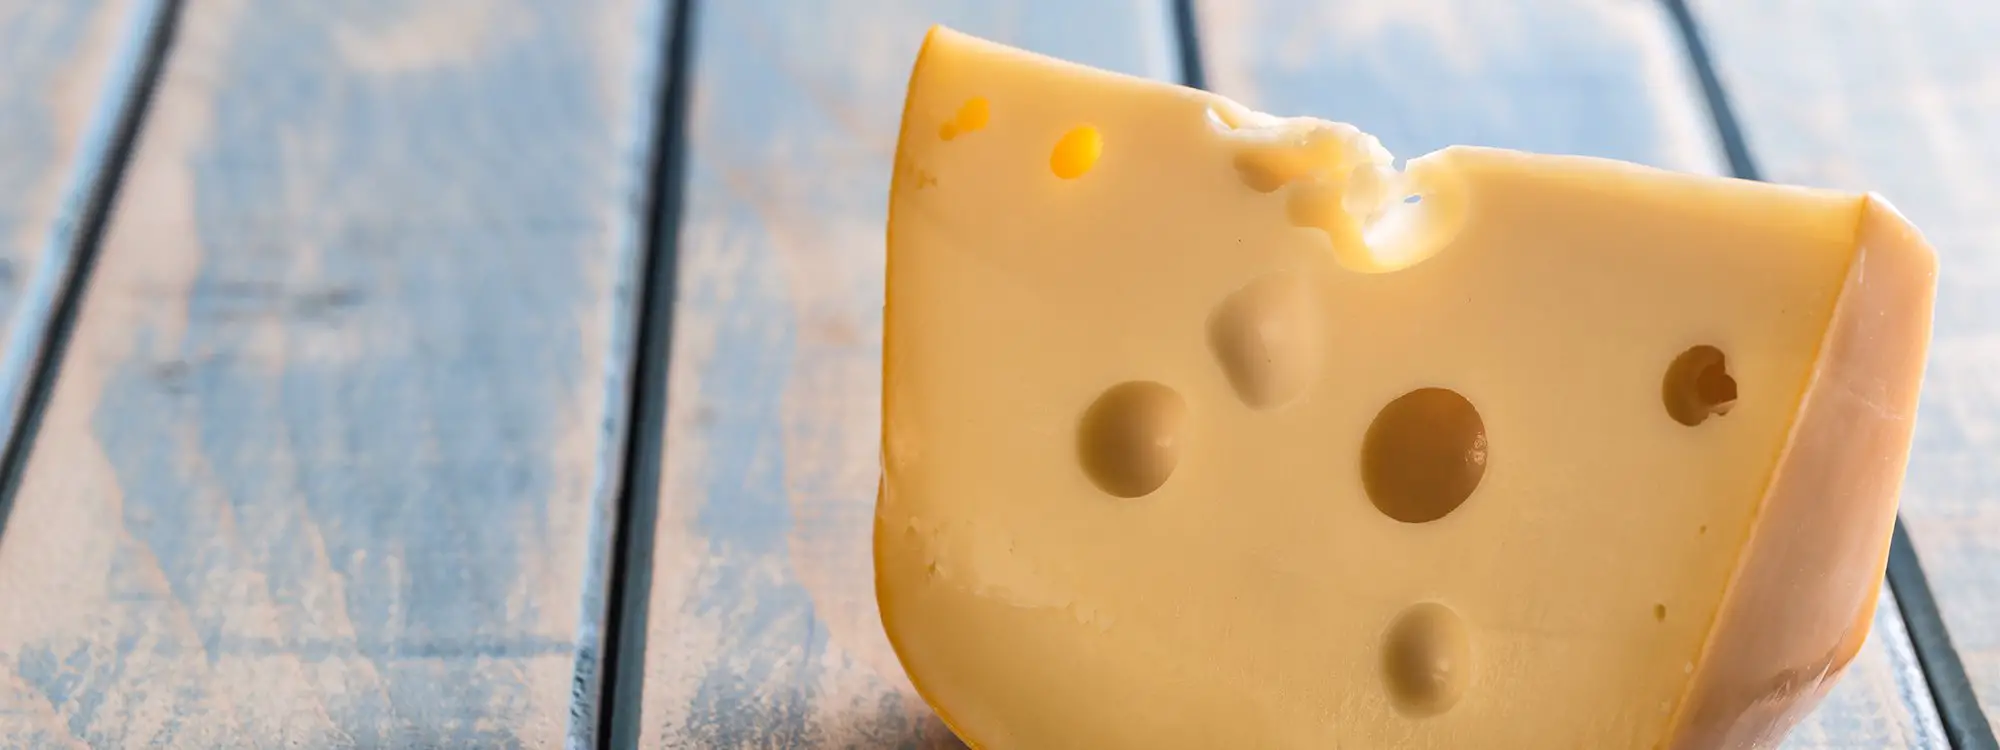 Why does Swiss cheese have holes?